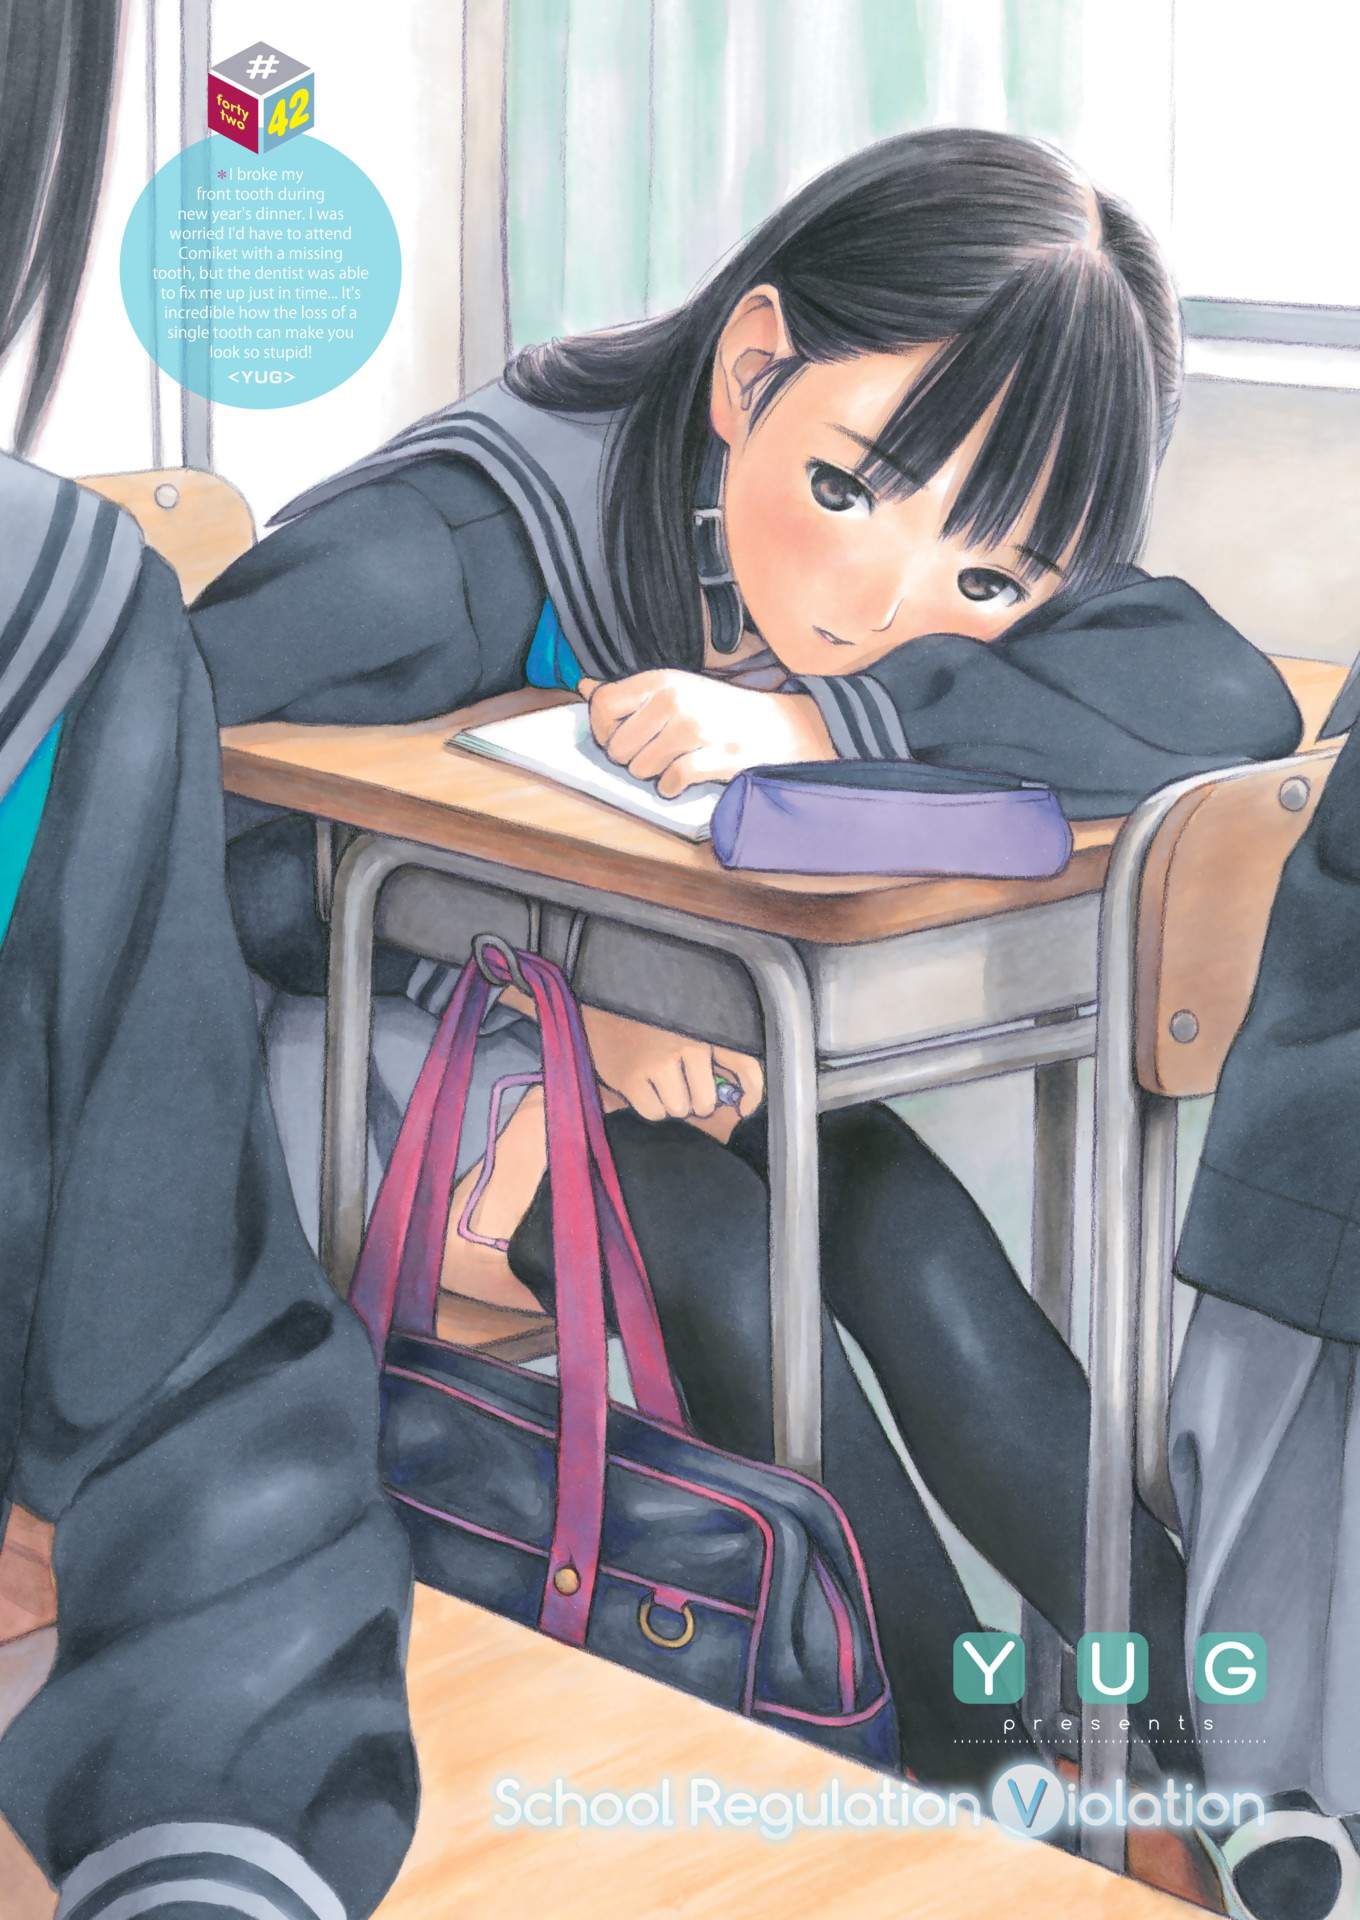 I thought I wouldn't be able to see it under the desk. I'm starting "Waruikoto" even though there are other people in the room♀ www (3) 35